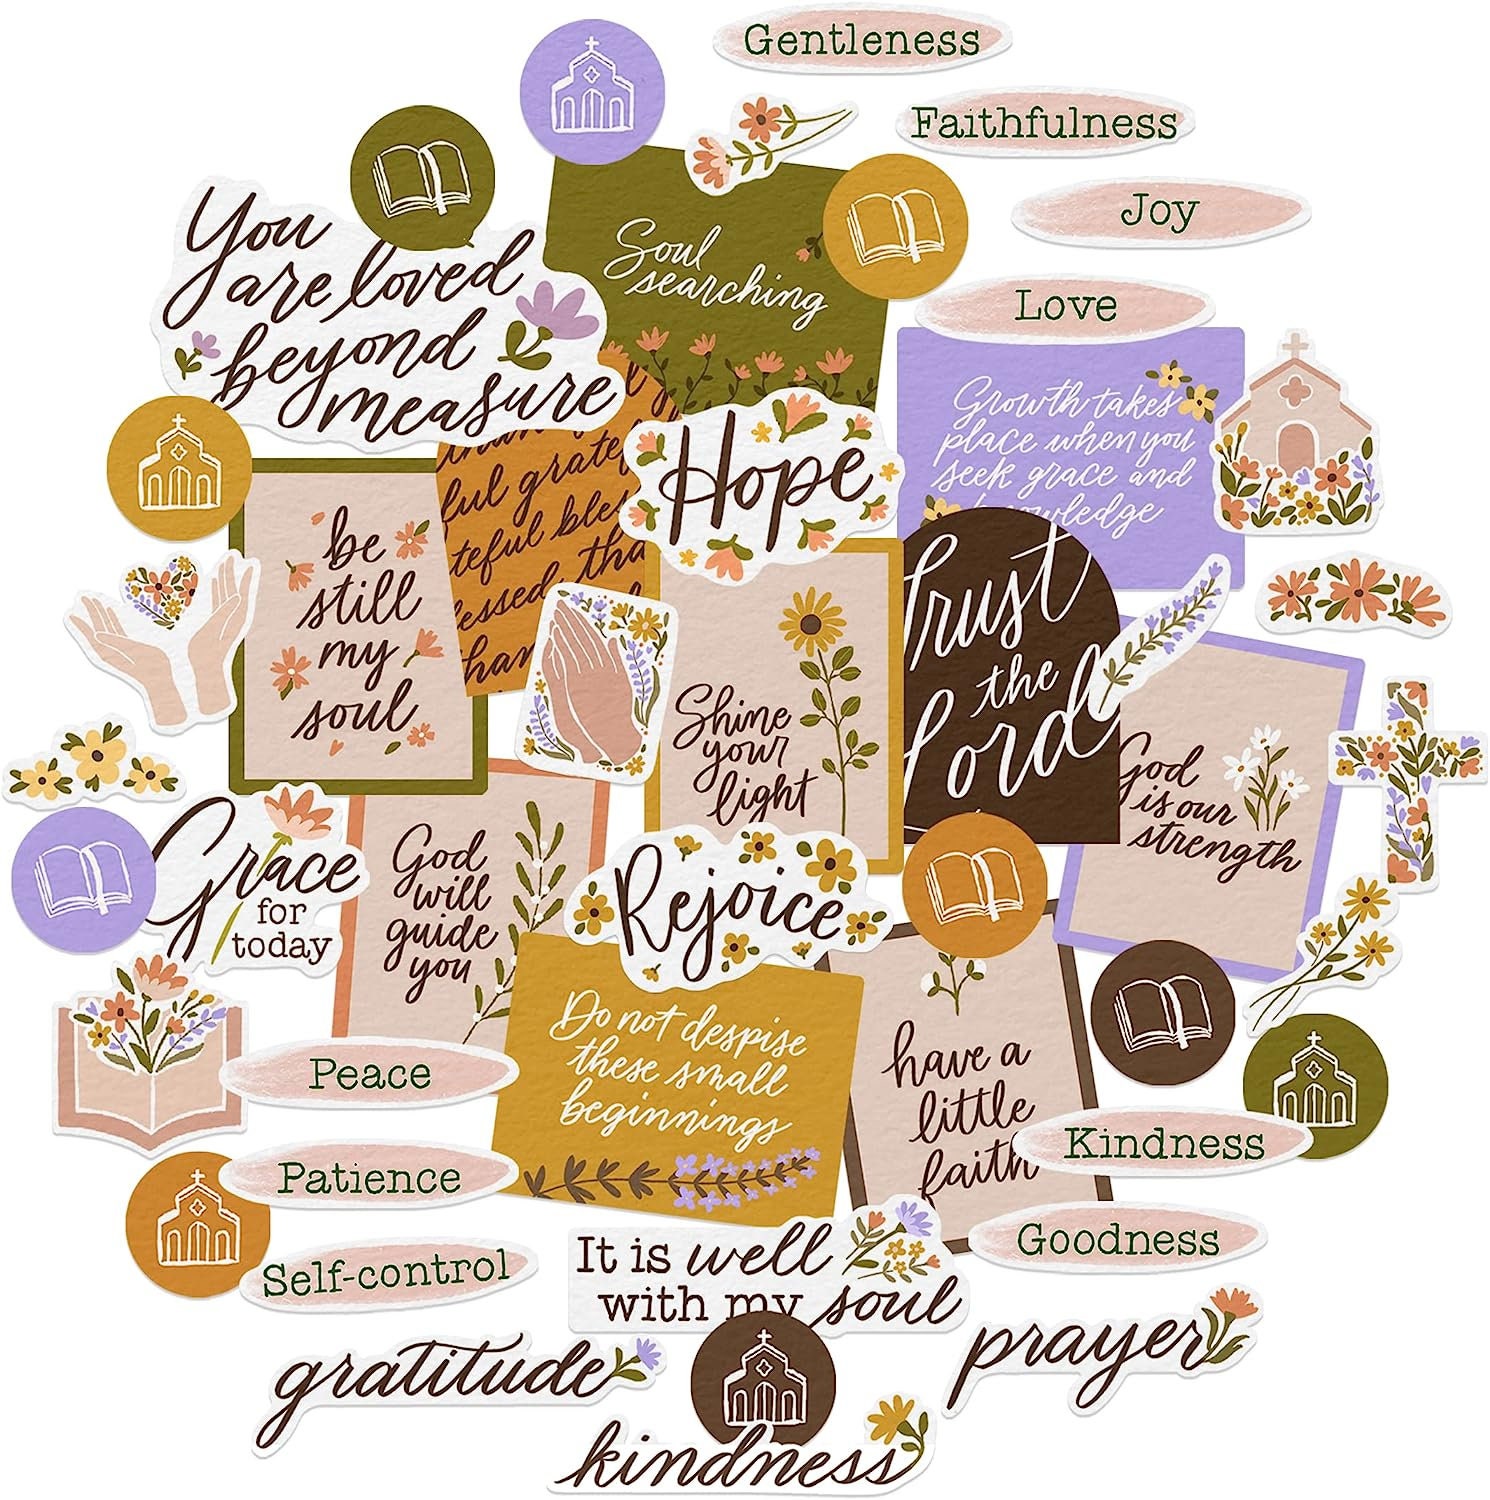 Christian Vision Board Clip Art Book: Christian Vision Board, Scriptural Affirmations on Healing, Success, Spiritual Growth, Journal, & Lots More. .